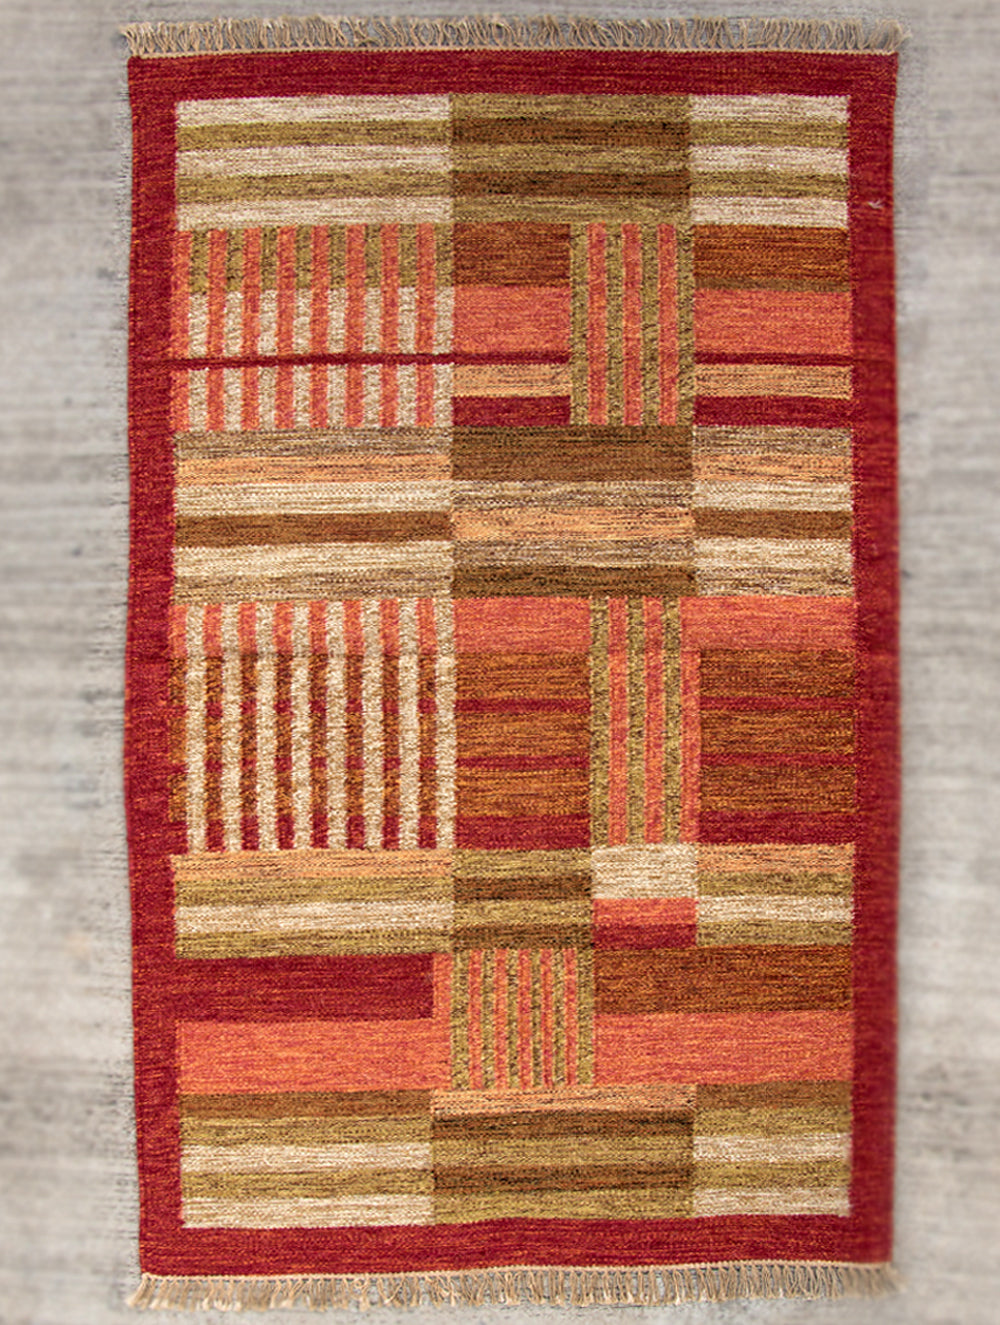 Load image into Gallery viewer, Handwoven Kilim Rug (5 x 3 ft) - Geometric - The India Craft House 